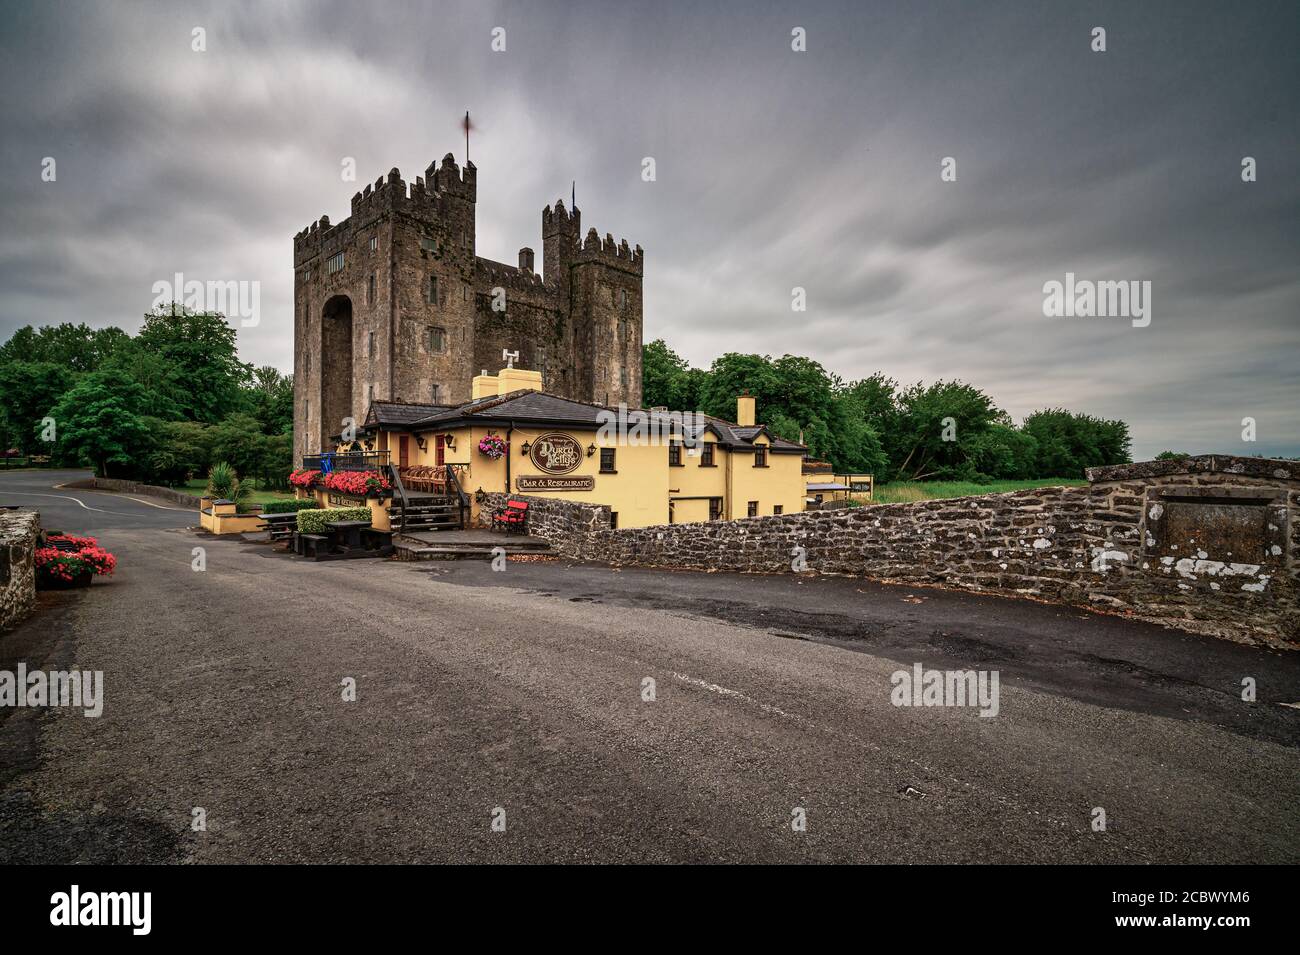 Bunratty Castle is a large 15th-century tower house in County Clare, Ireland. It is located in the centre of Bunratty village, by the N18 road between Stock Photo